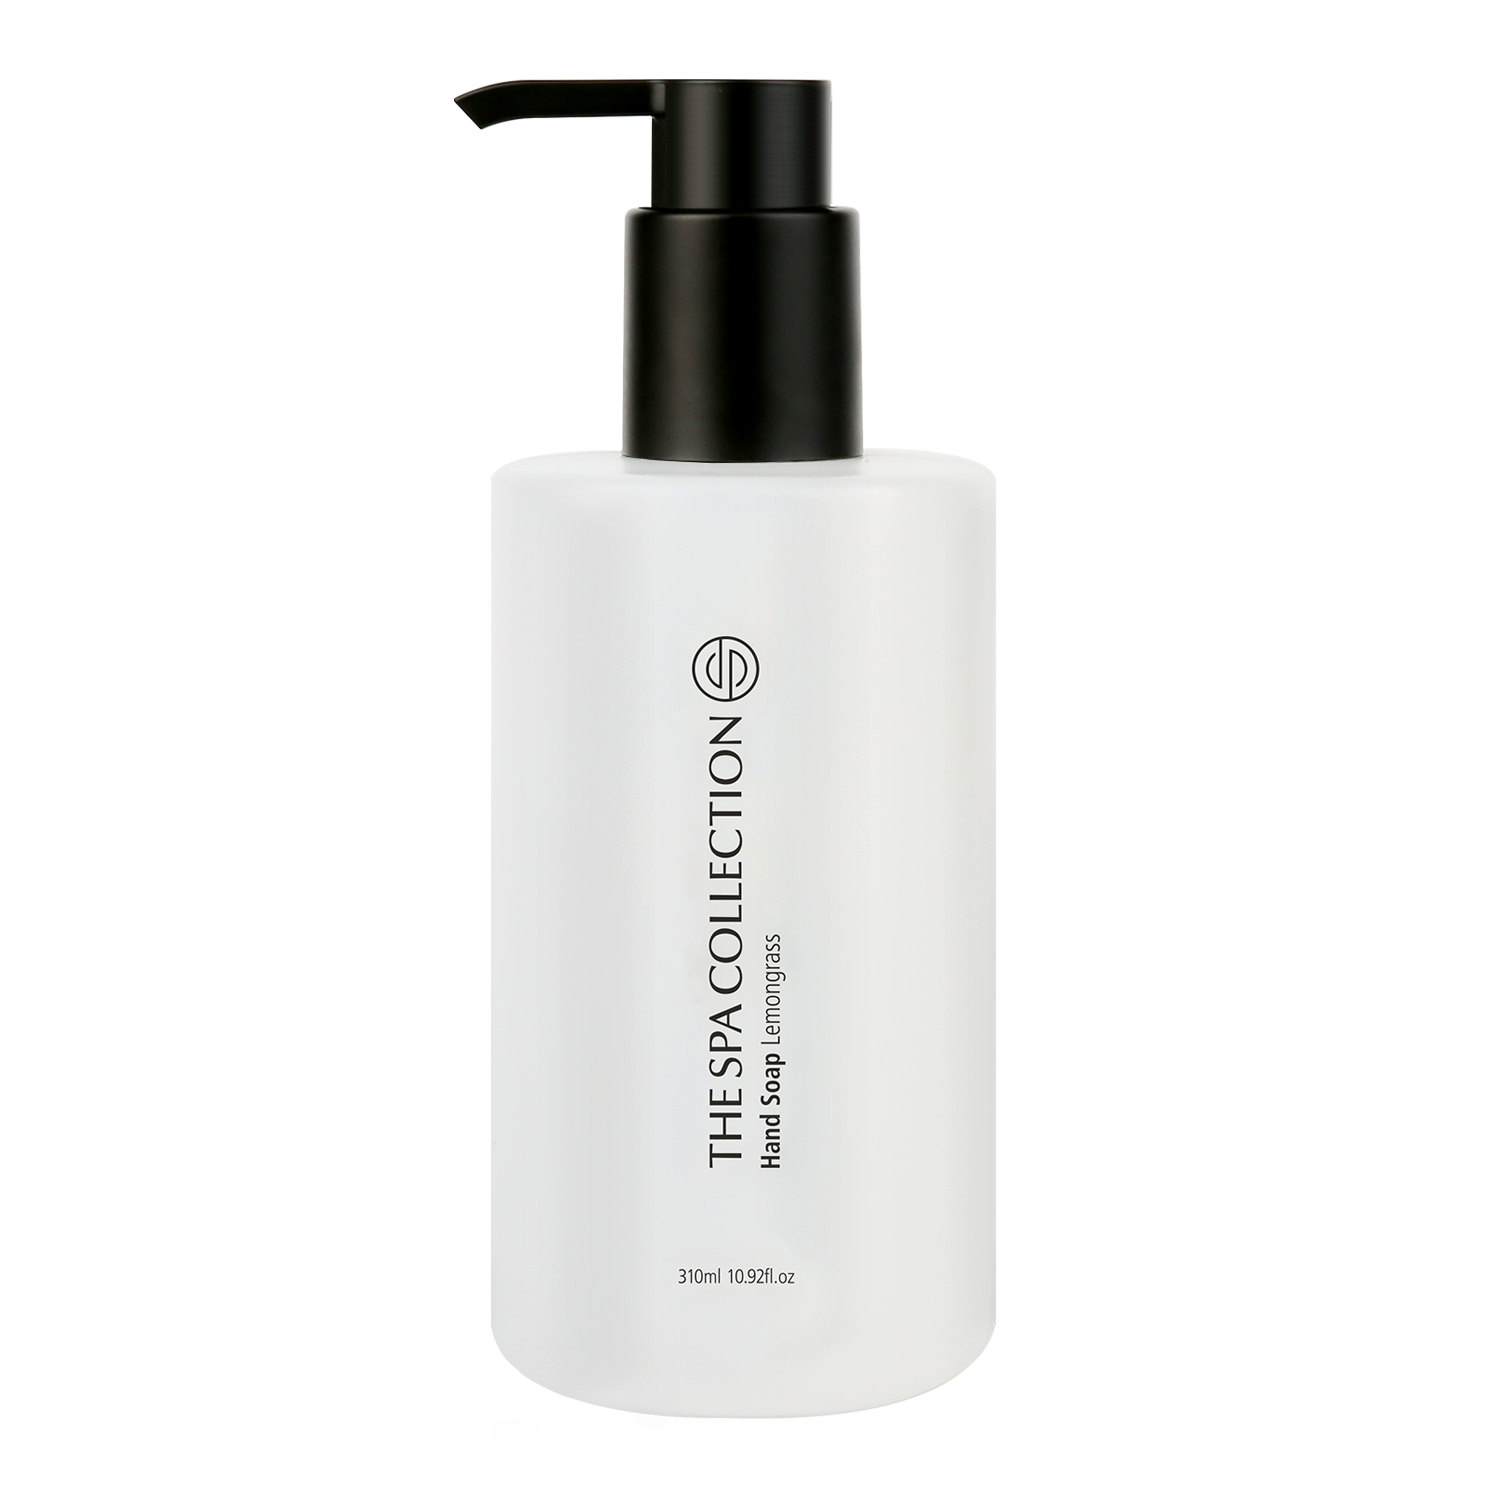 Hand soap - 310ml bottle - The Spa Collection Lemongrass